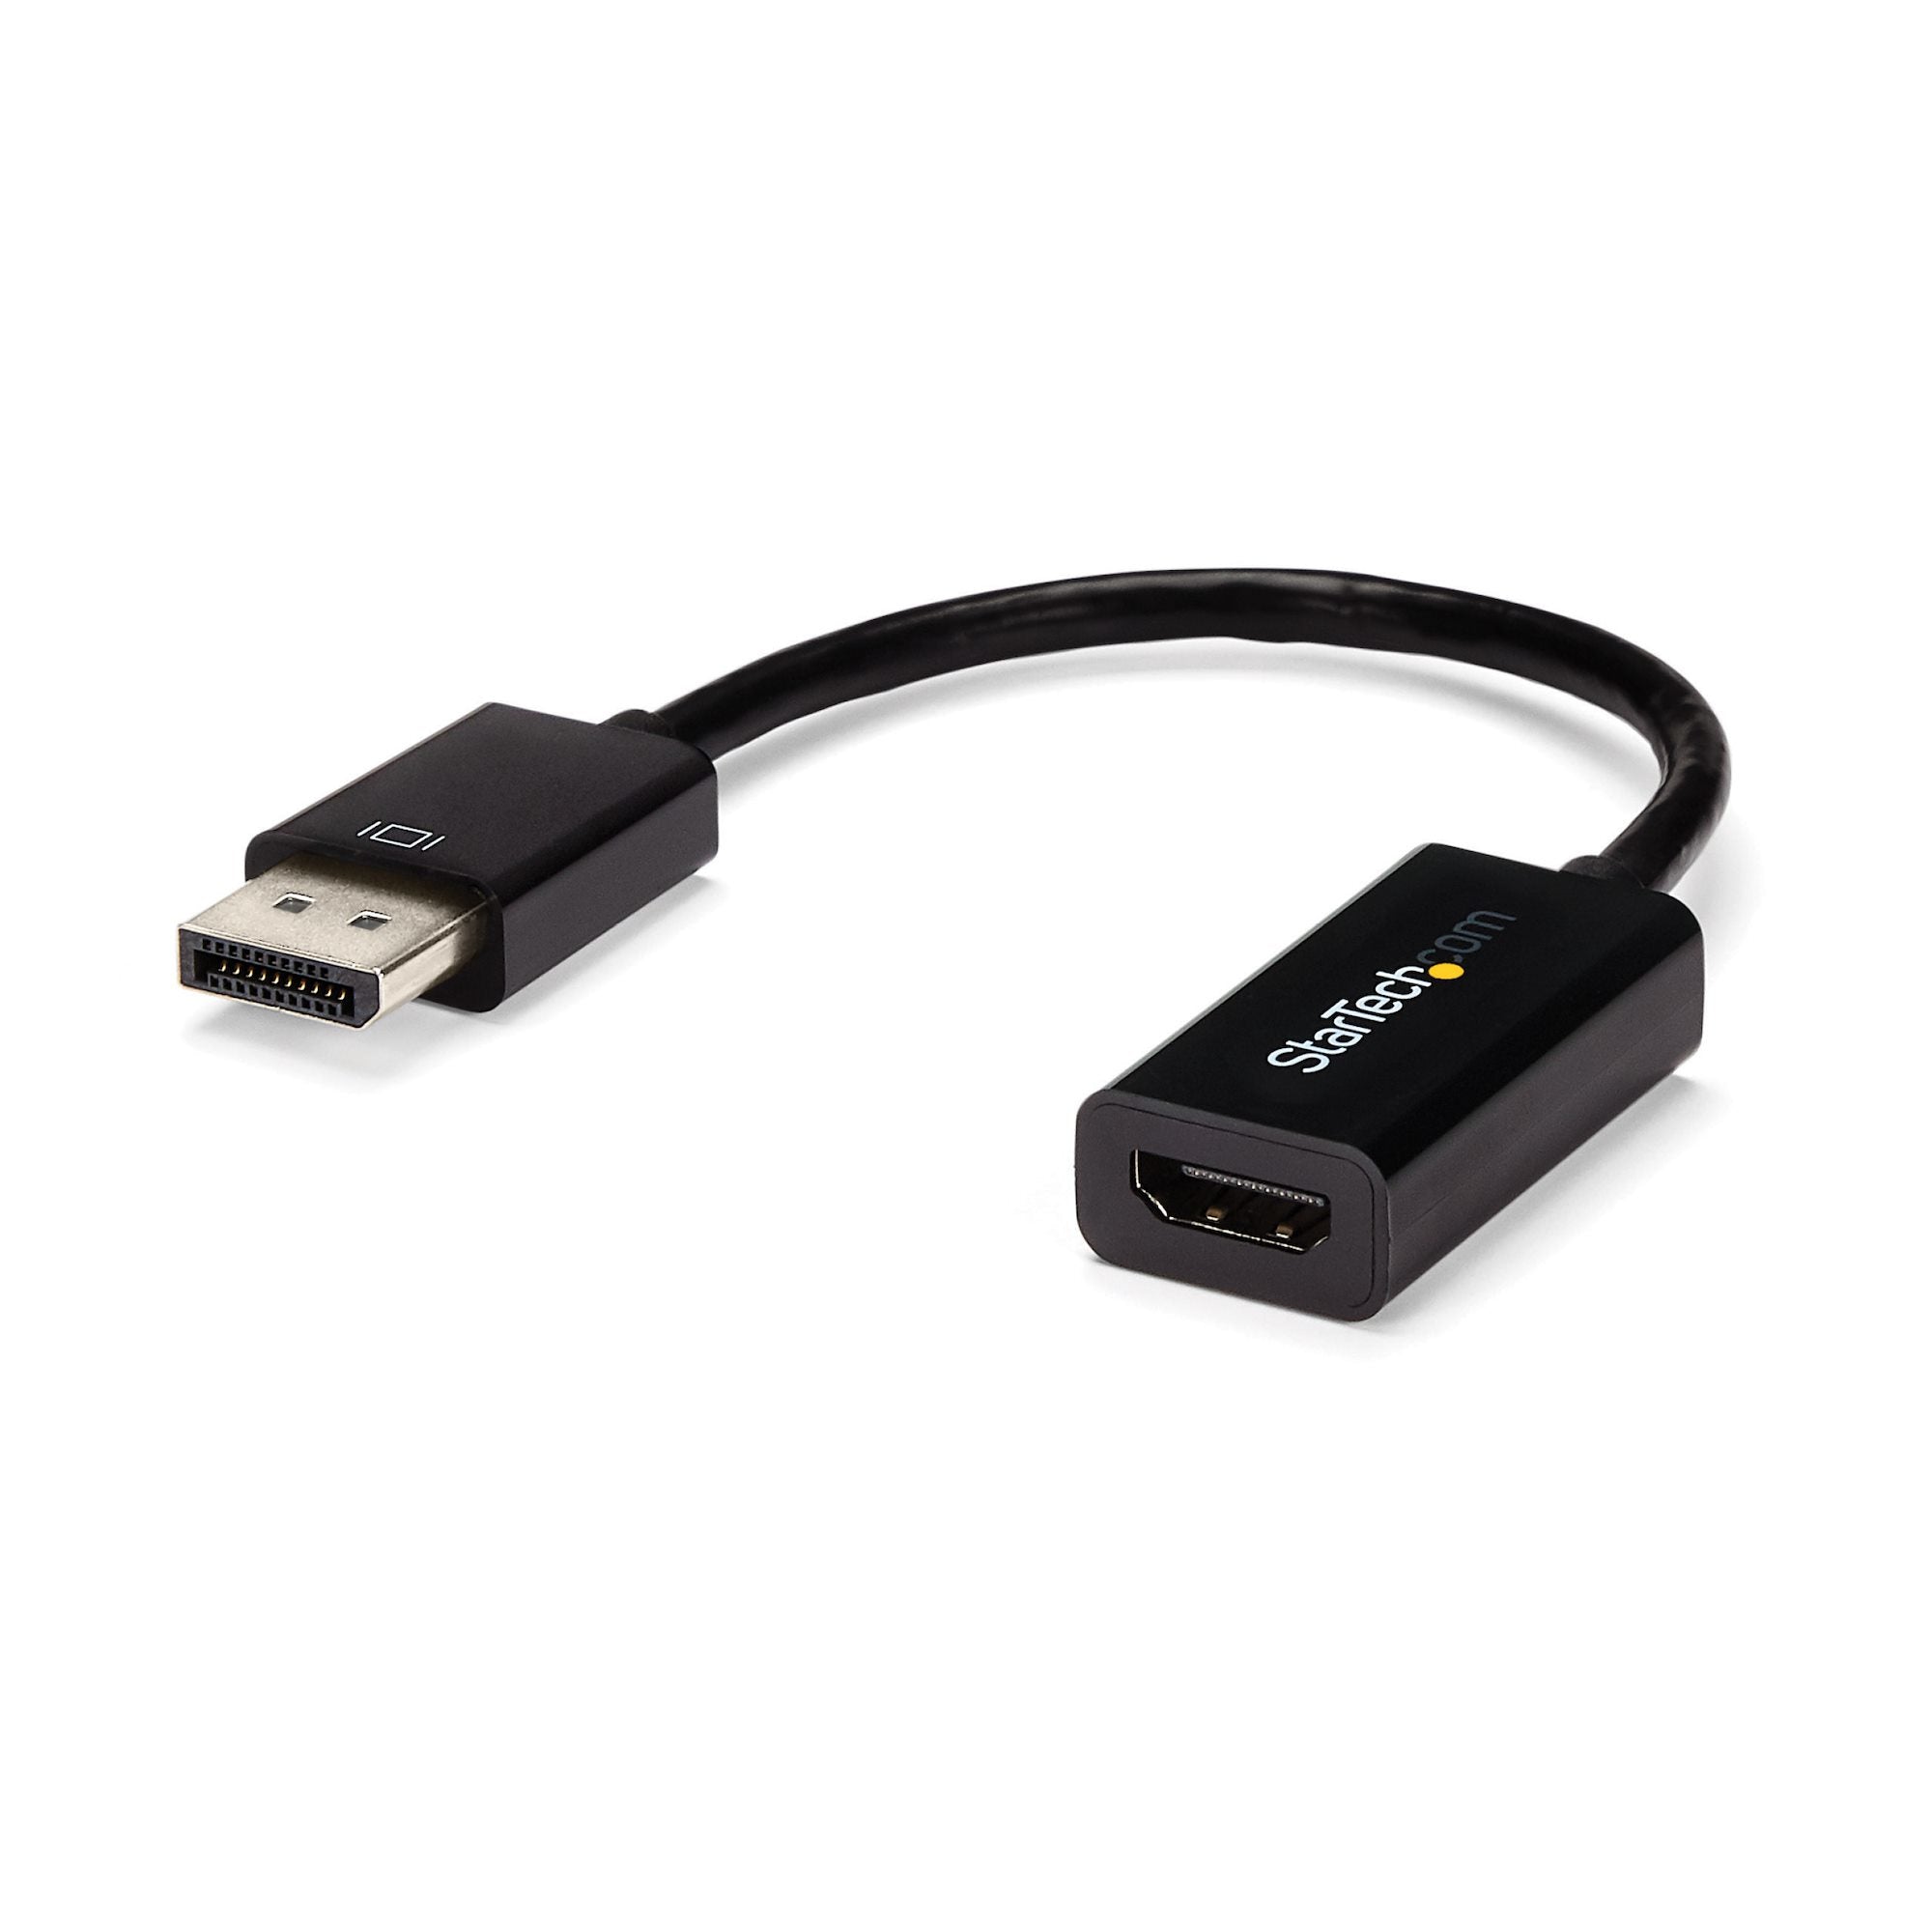 StarTech.com DisplayPort to HDMI Adapter - 4K 30Hz Active DisplayPort to HDMI Video Converter - DP to HDMI Monitor/TV/Display Cable Adapter Dongle - Ultra HD DP 1.2 to HDMI 1.4 Adapter